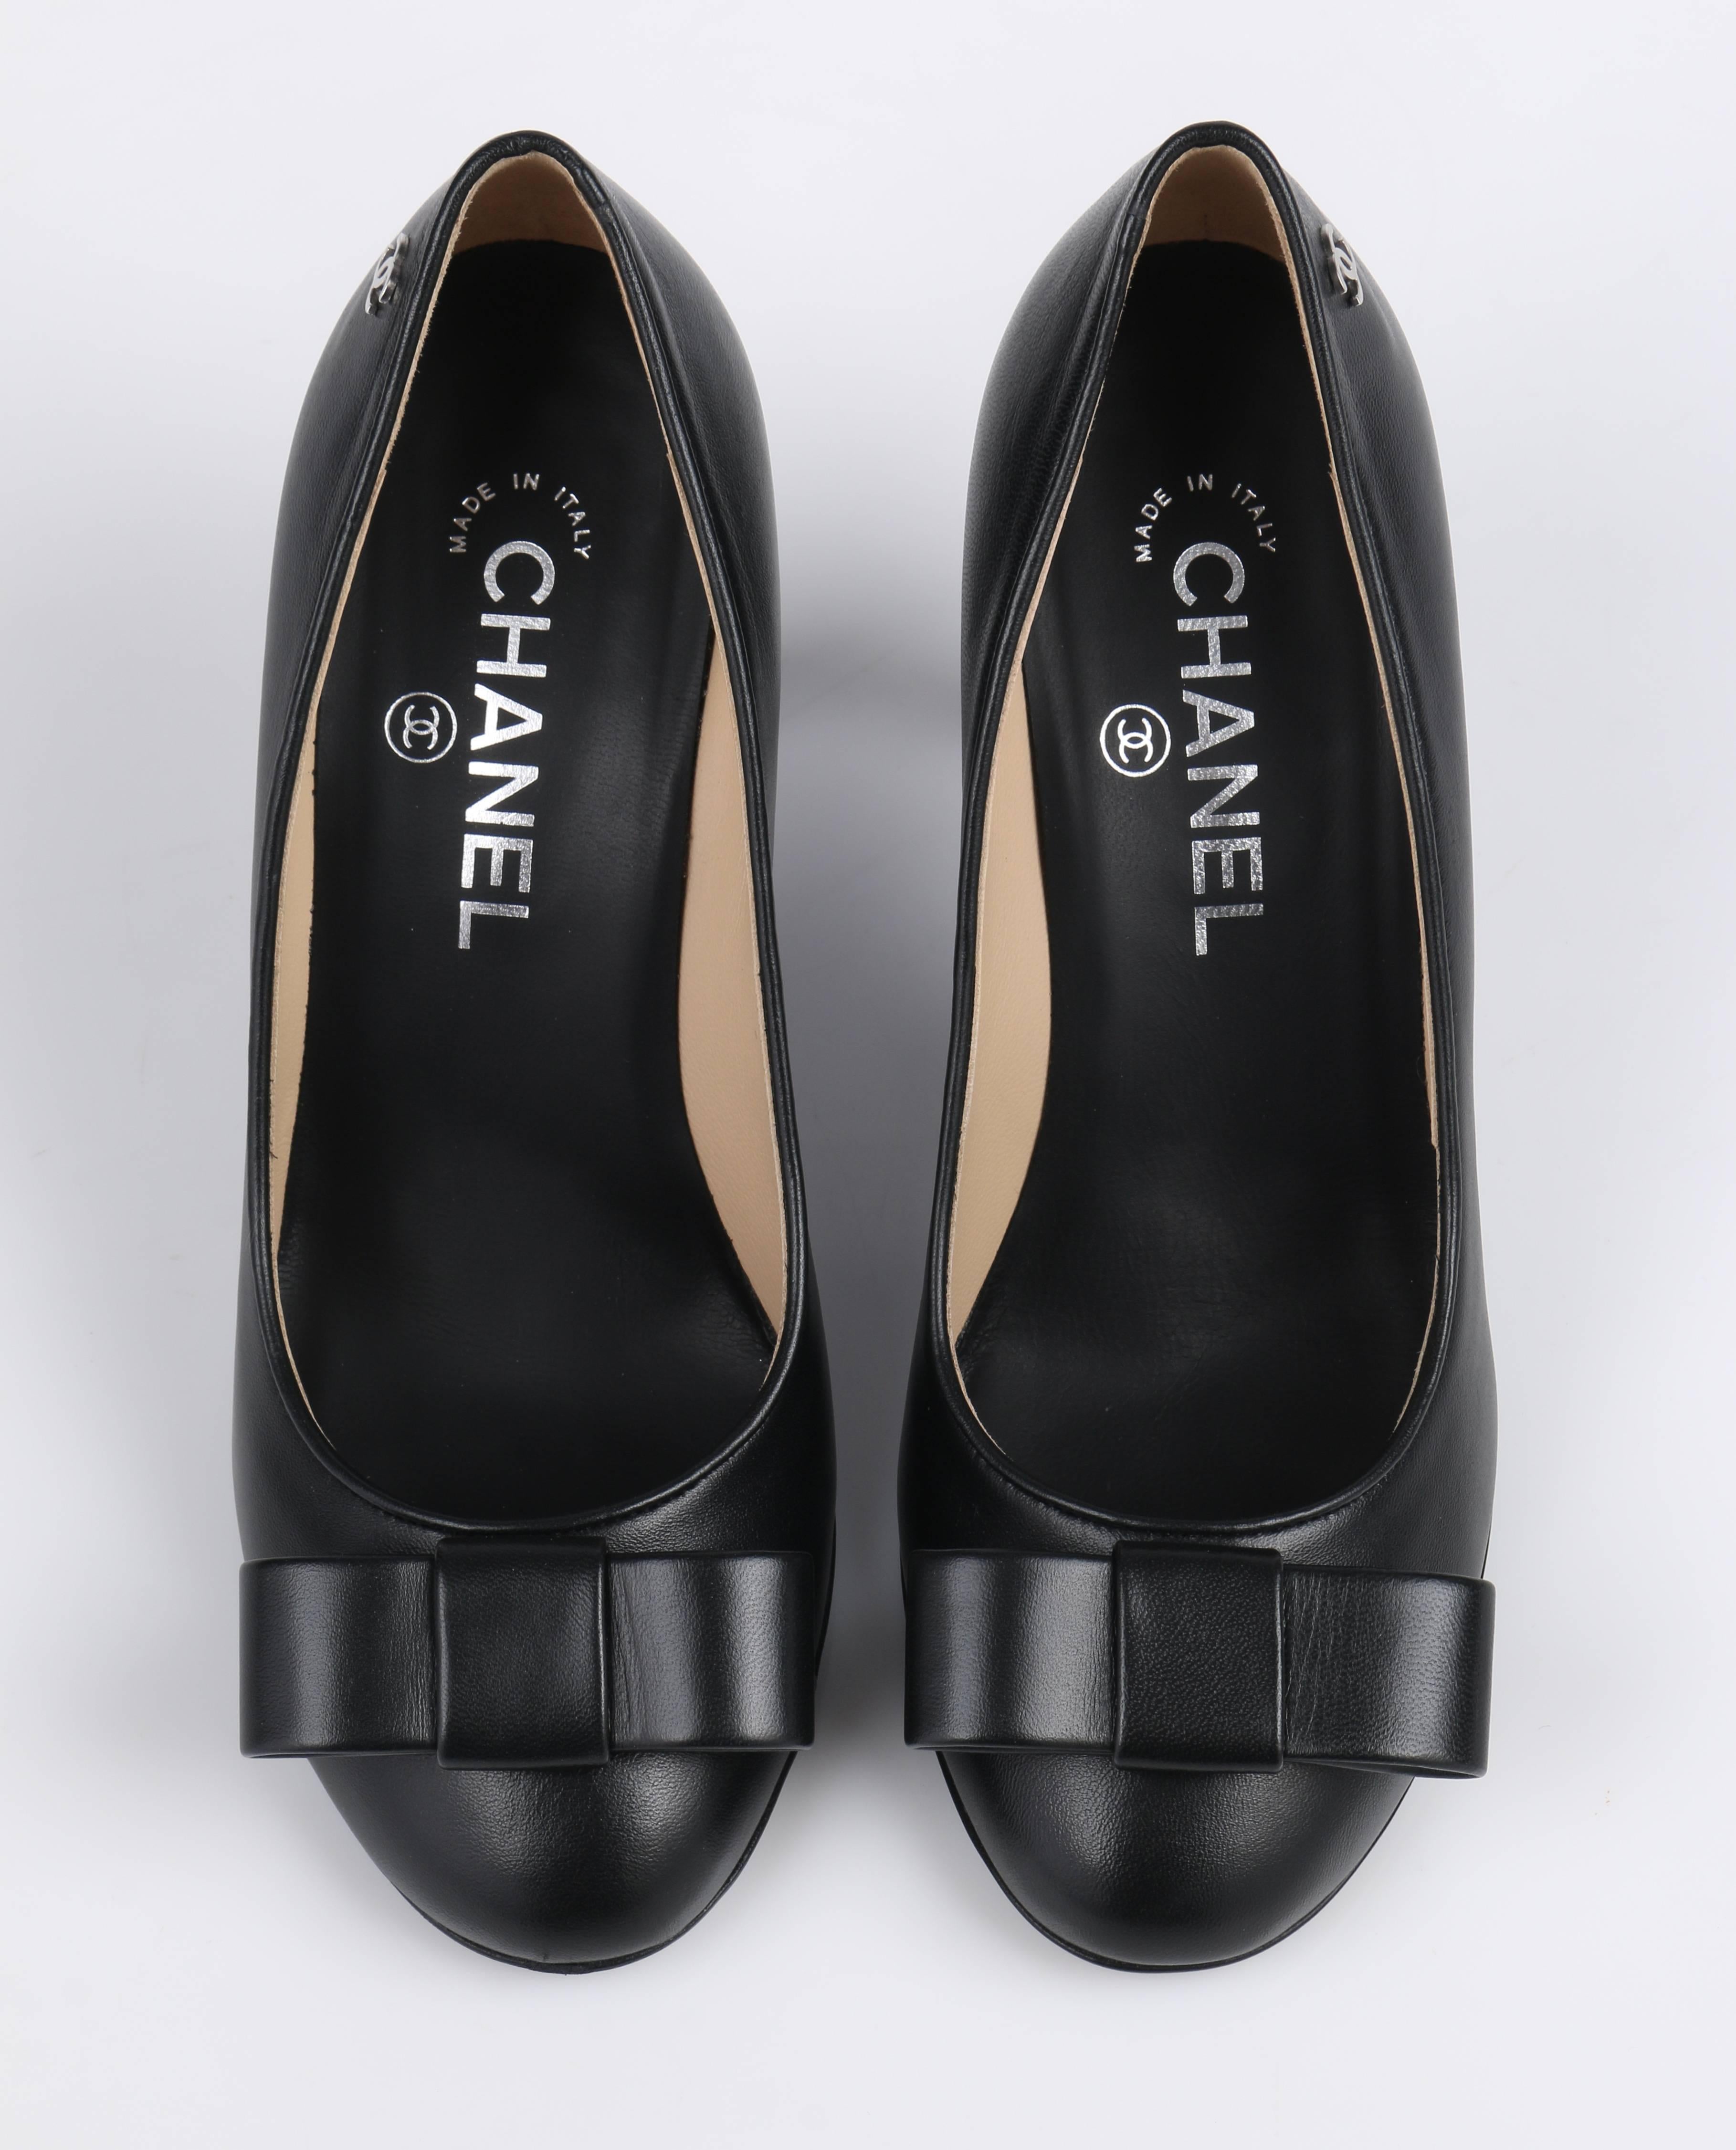 CHANEL S/S 2015 Classic Black Leather CC Logo Bow Front Pumps Shoes 36.5 In Excellent Condition In Thiensville, WI